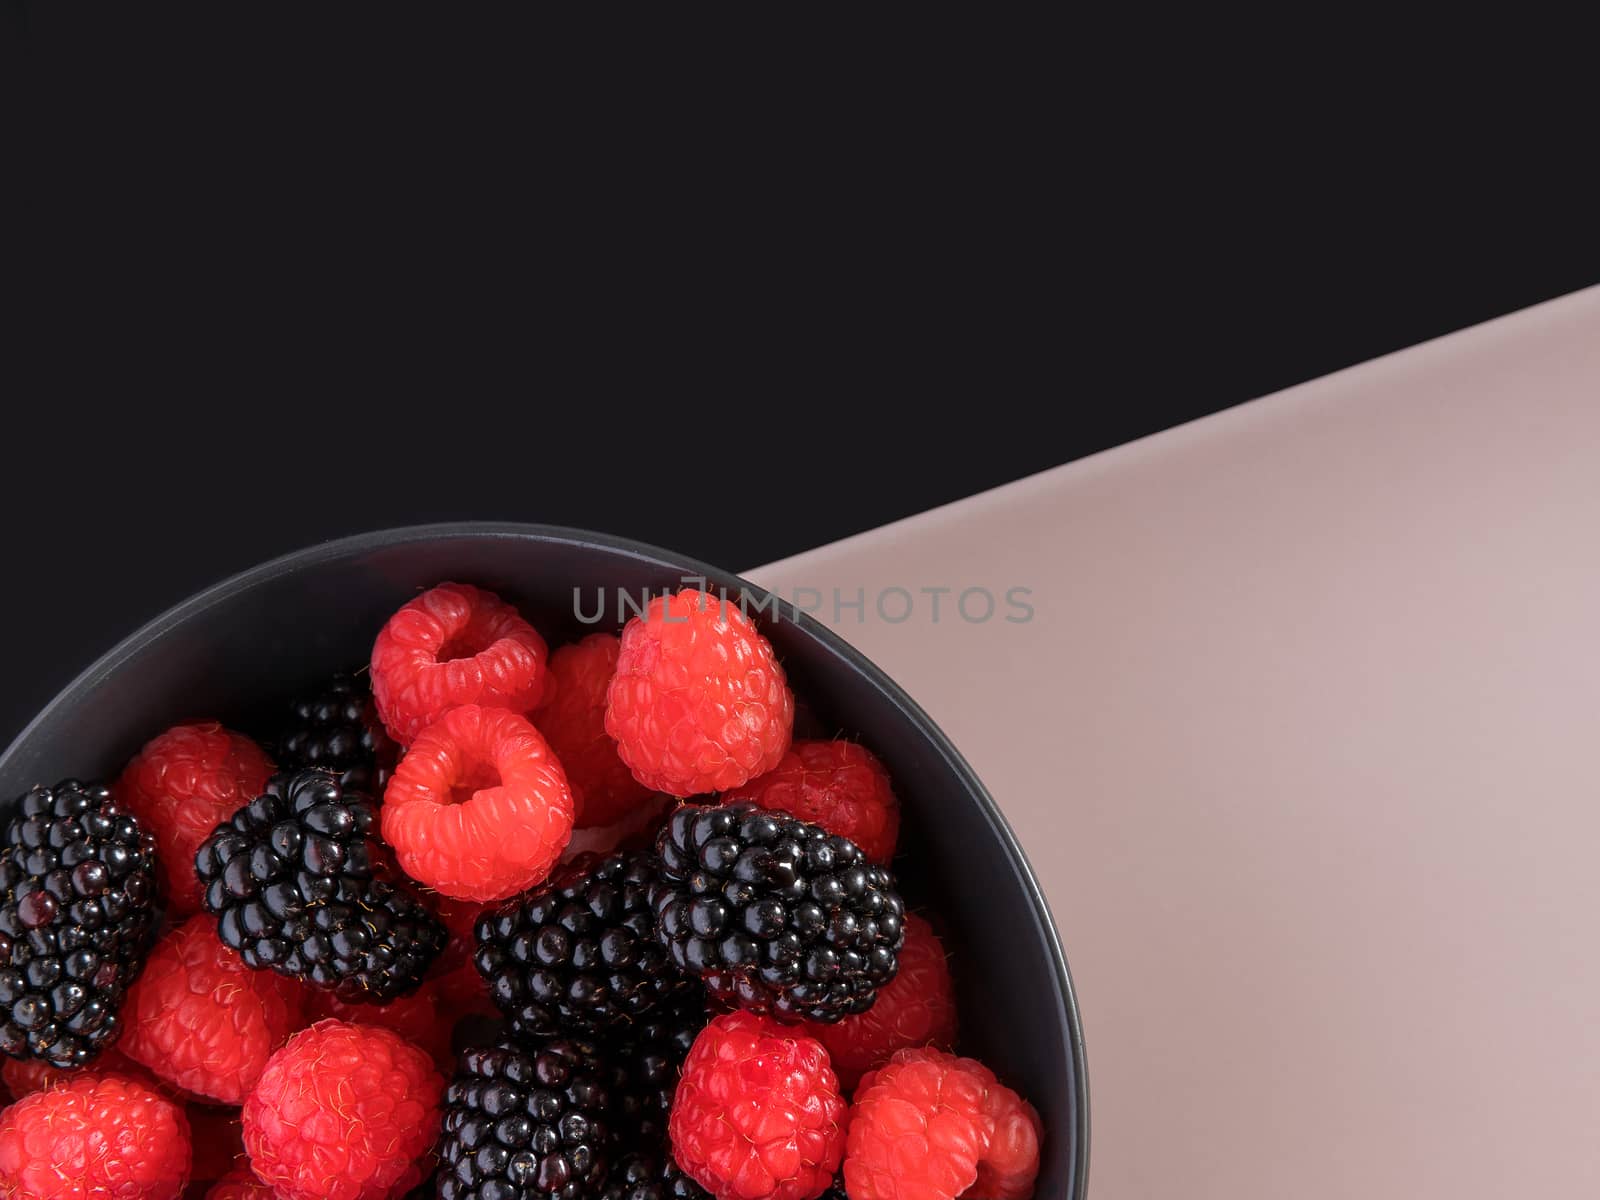 Blackberries and raspberries in a black bowl. Black and light pink background. Top view.